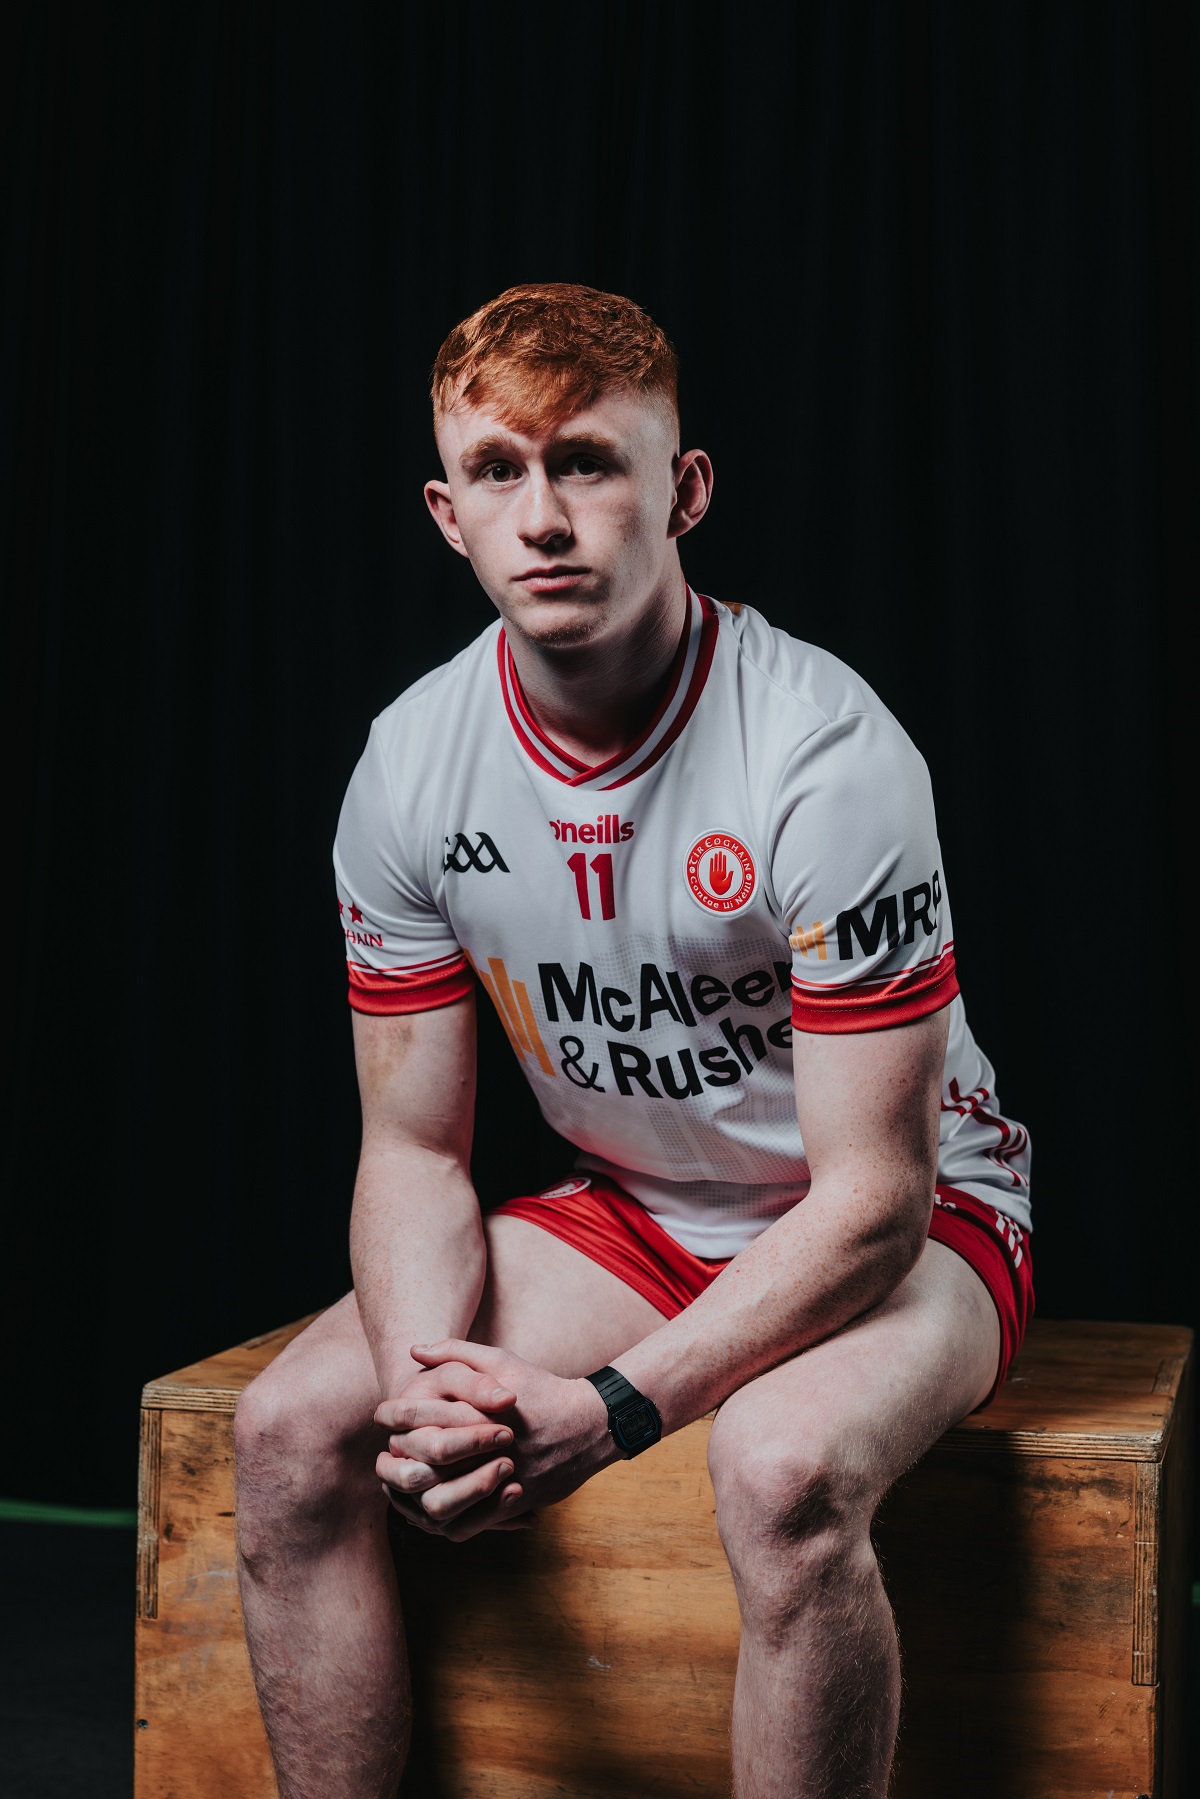 Seanie making the most of his chance to shine